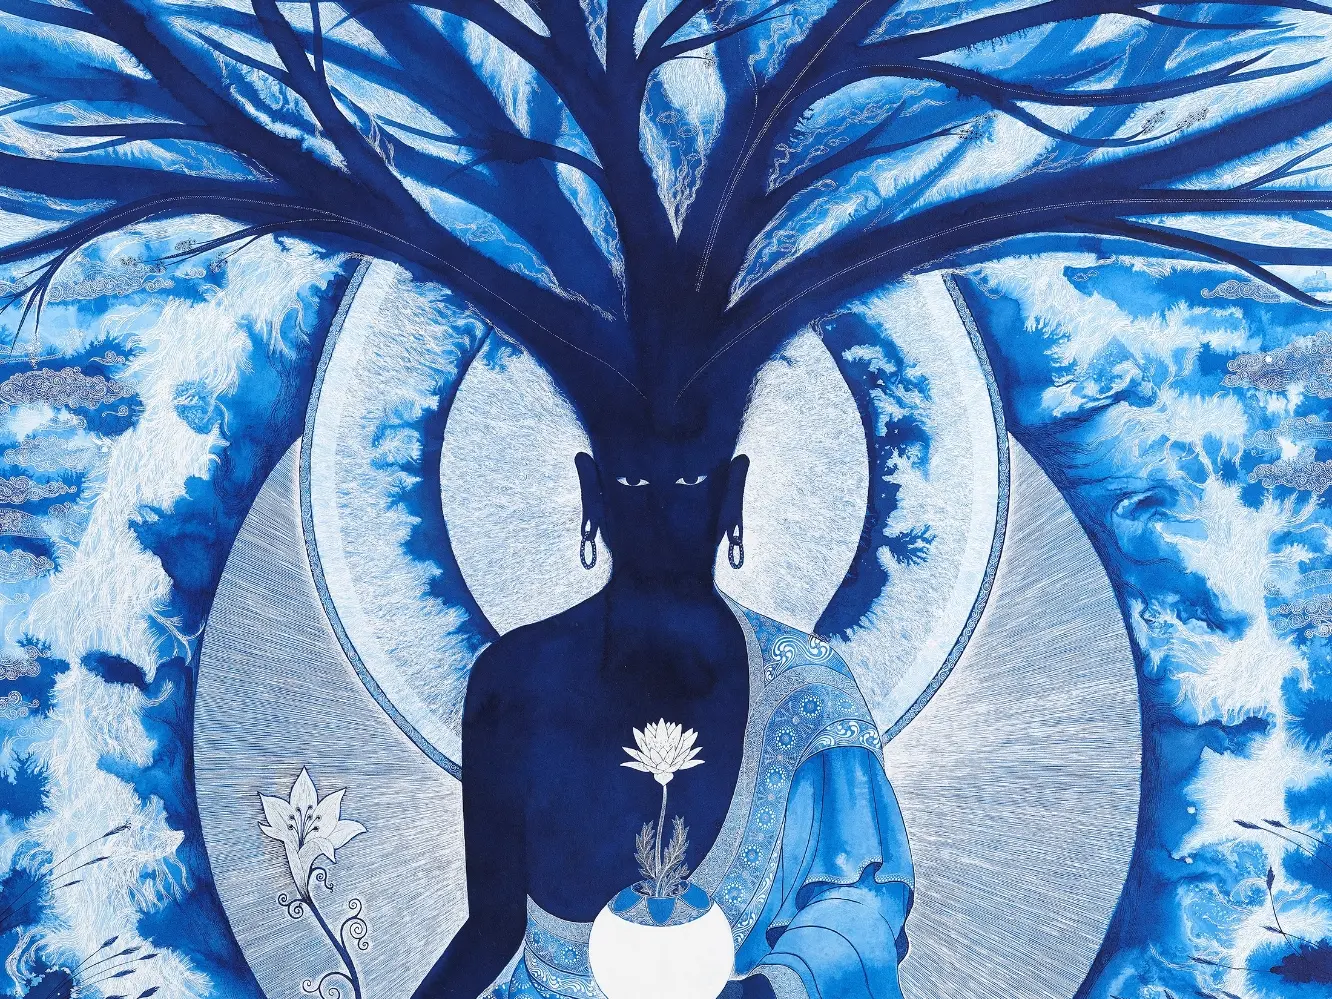 painting of blue buddha with tree emerging from head, by Dan Hillier